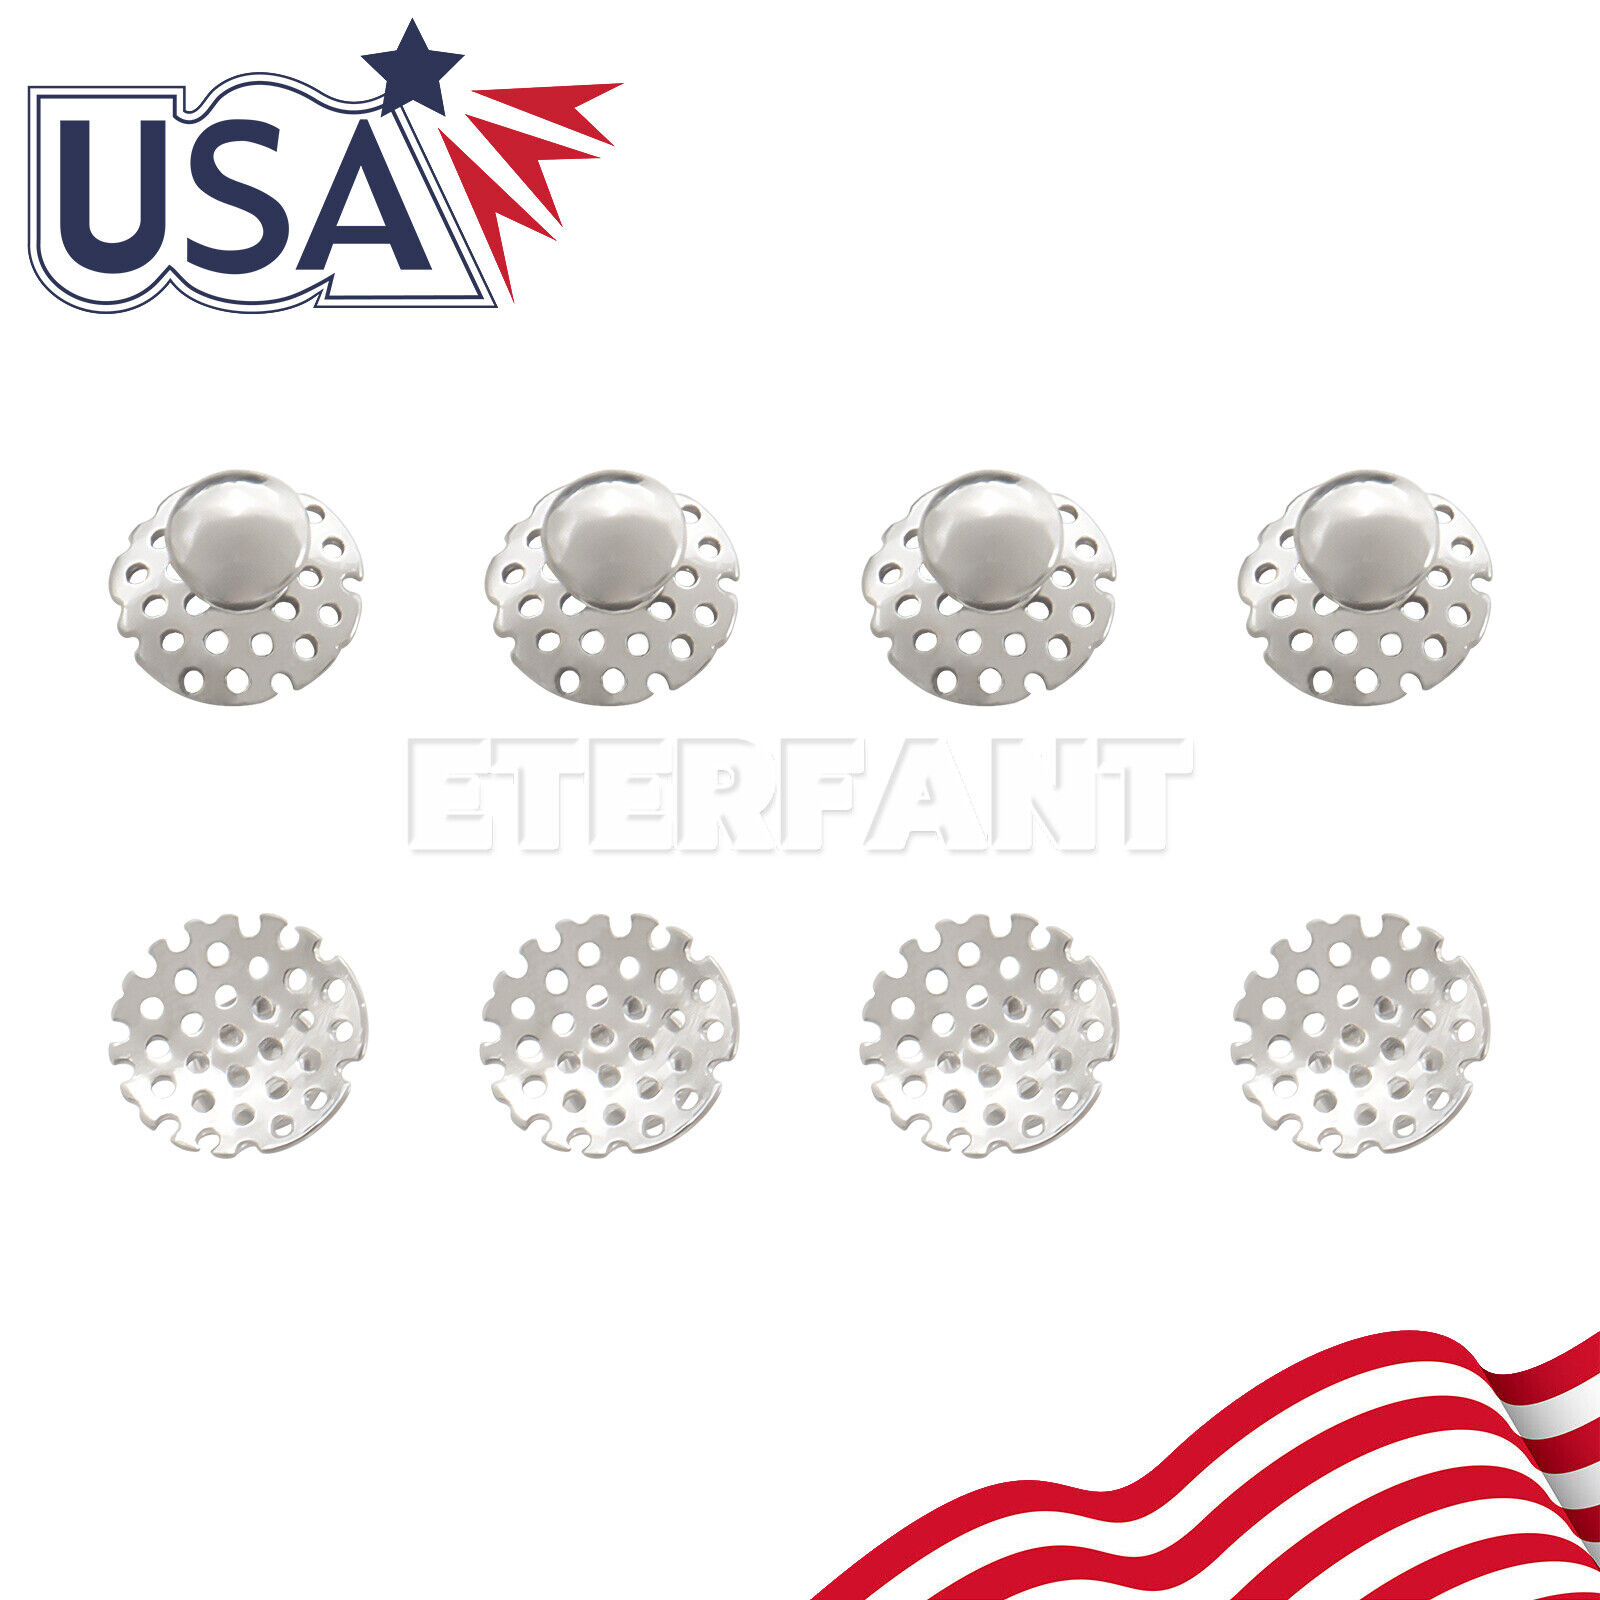 10PCs ETERFANT Dental Orthodontic Lingual Buttons Bondable Round with Holes US